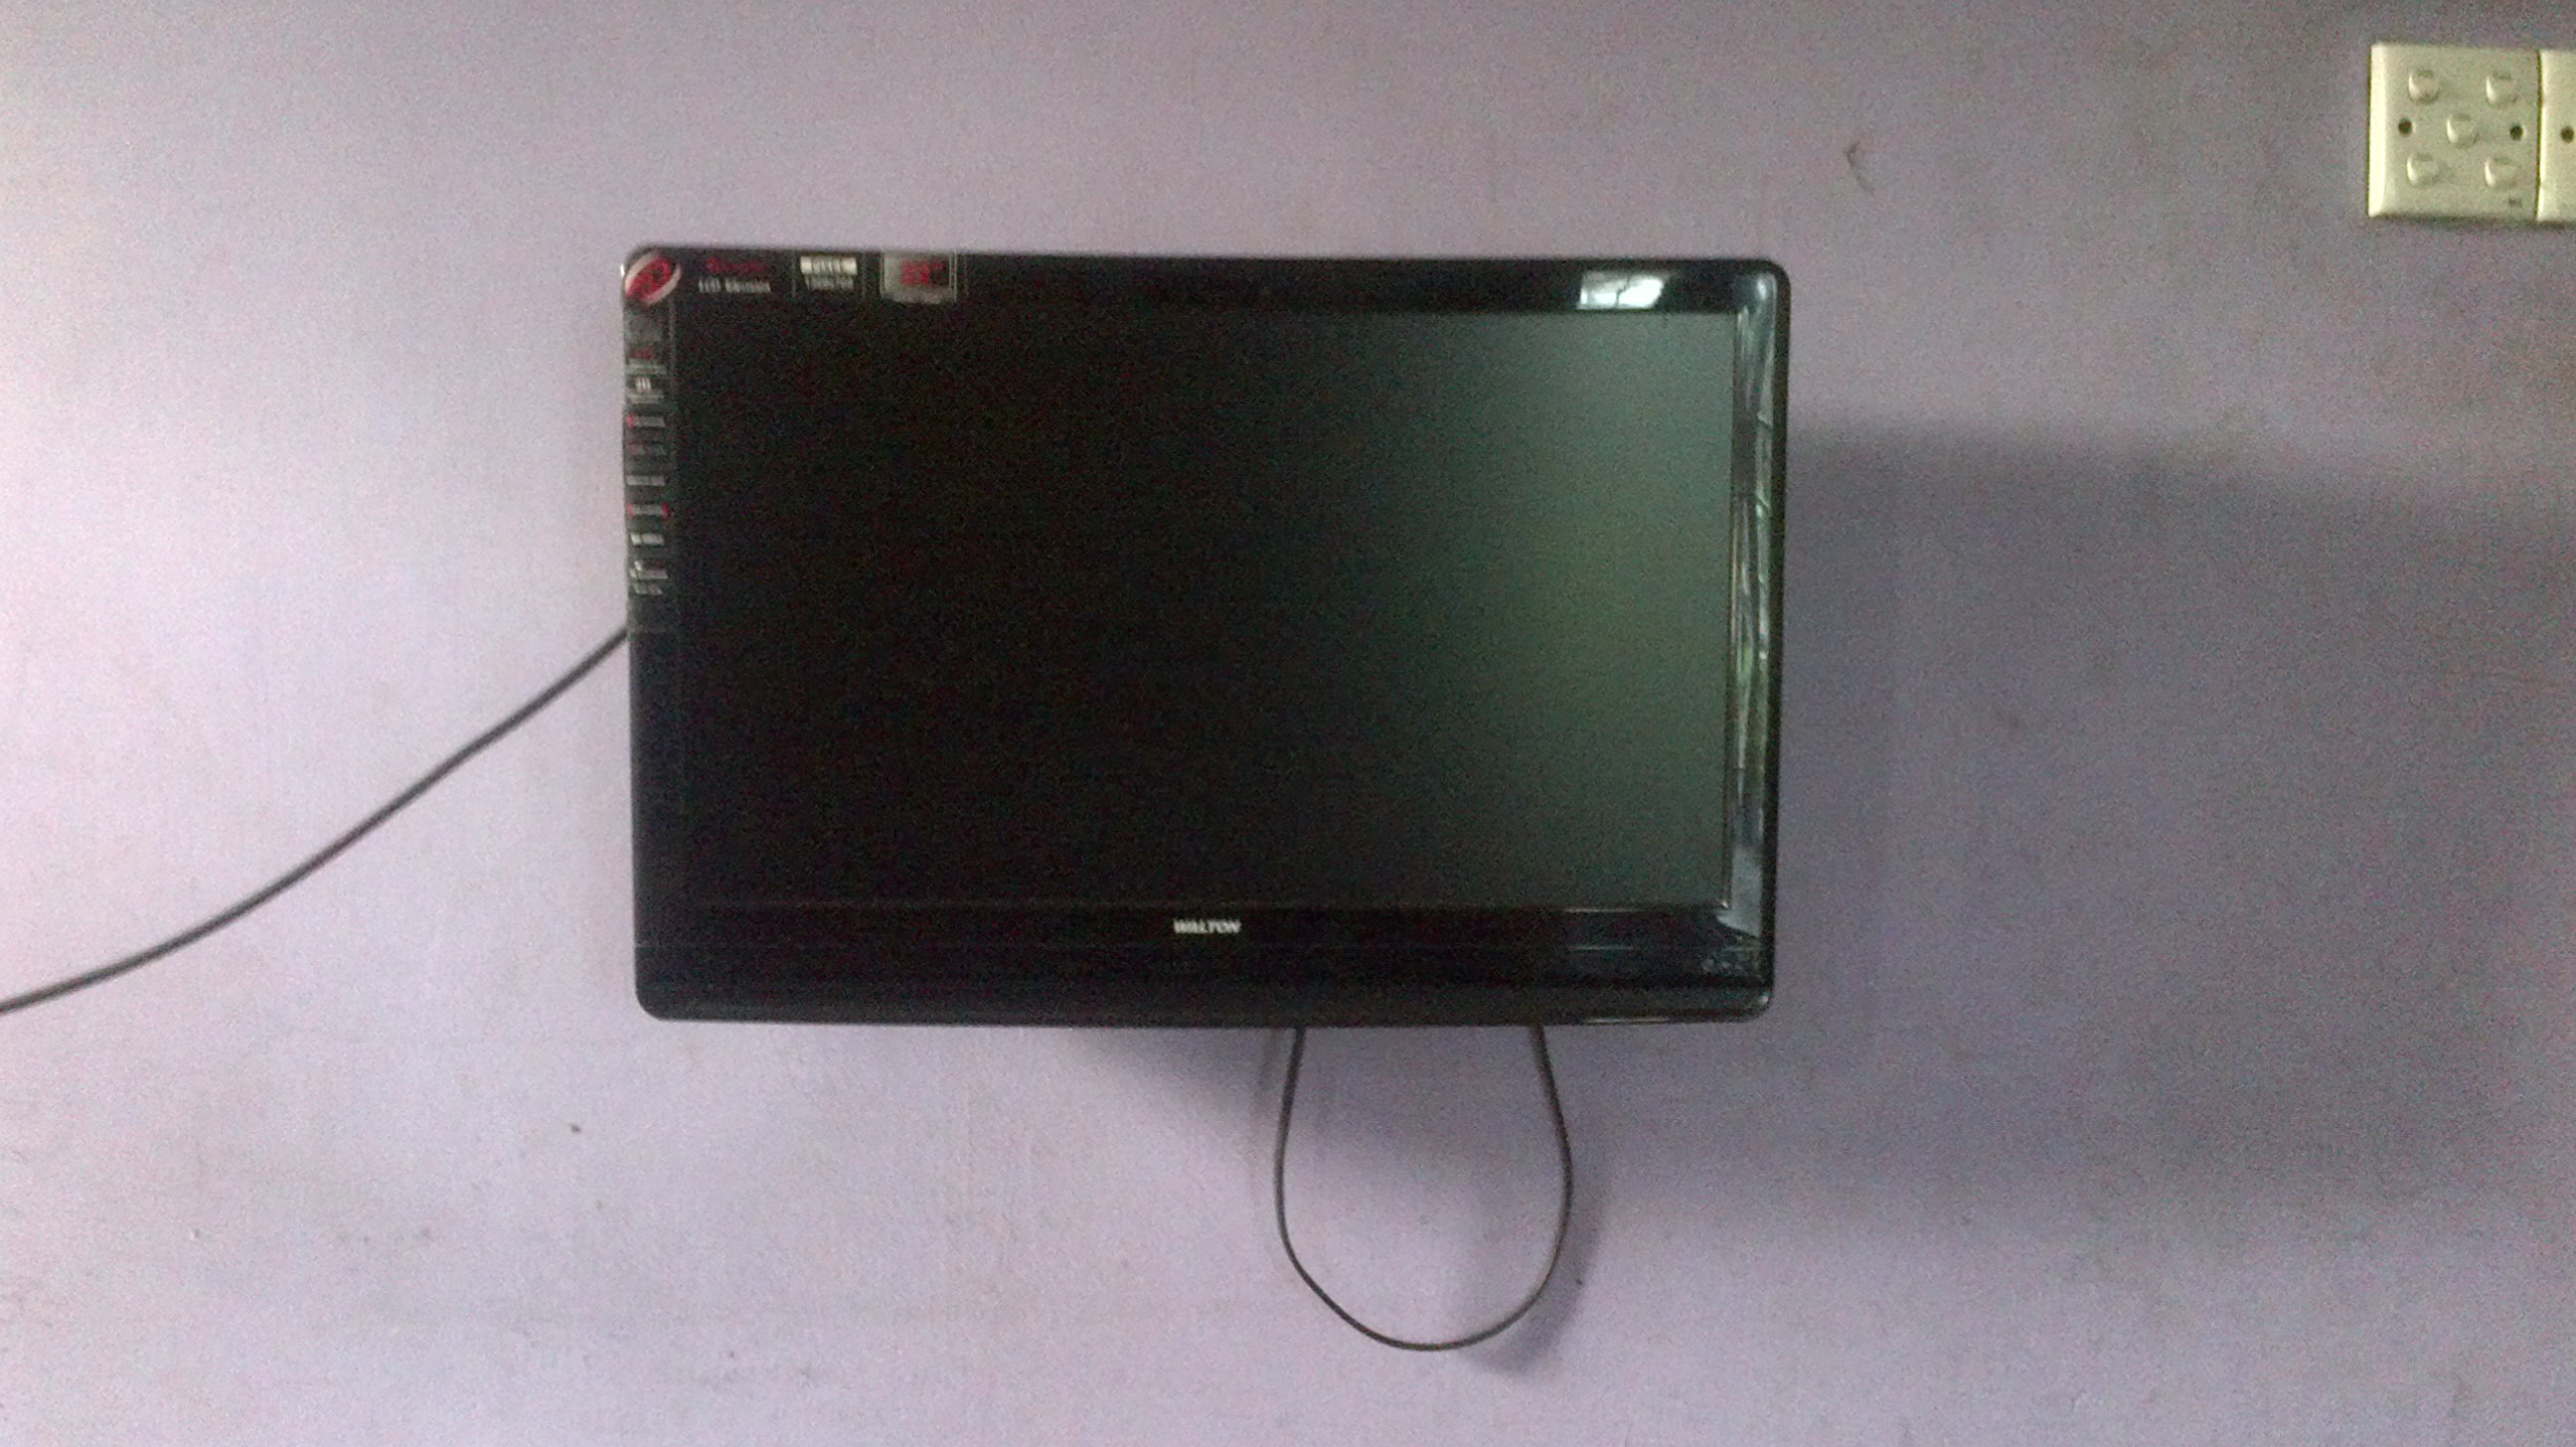 walton 22 crystal LCD television with pc connection port large image 0